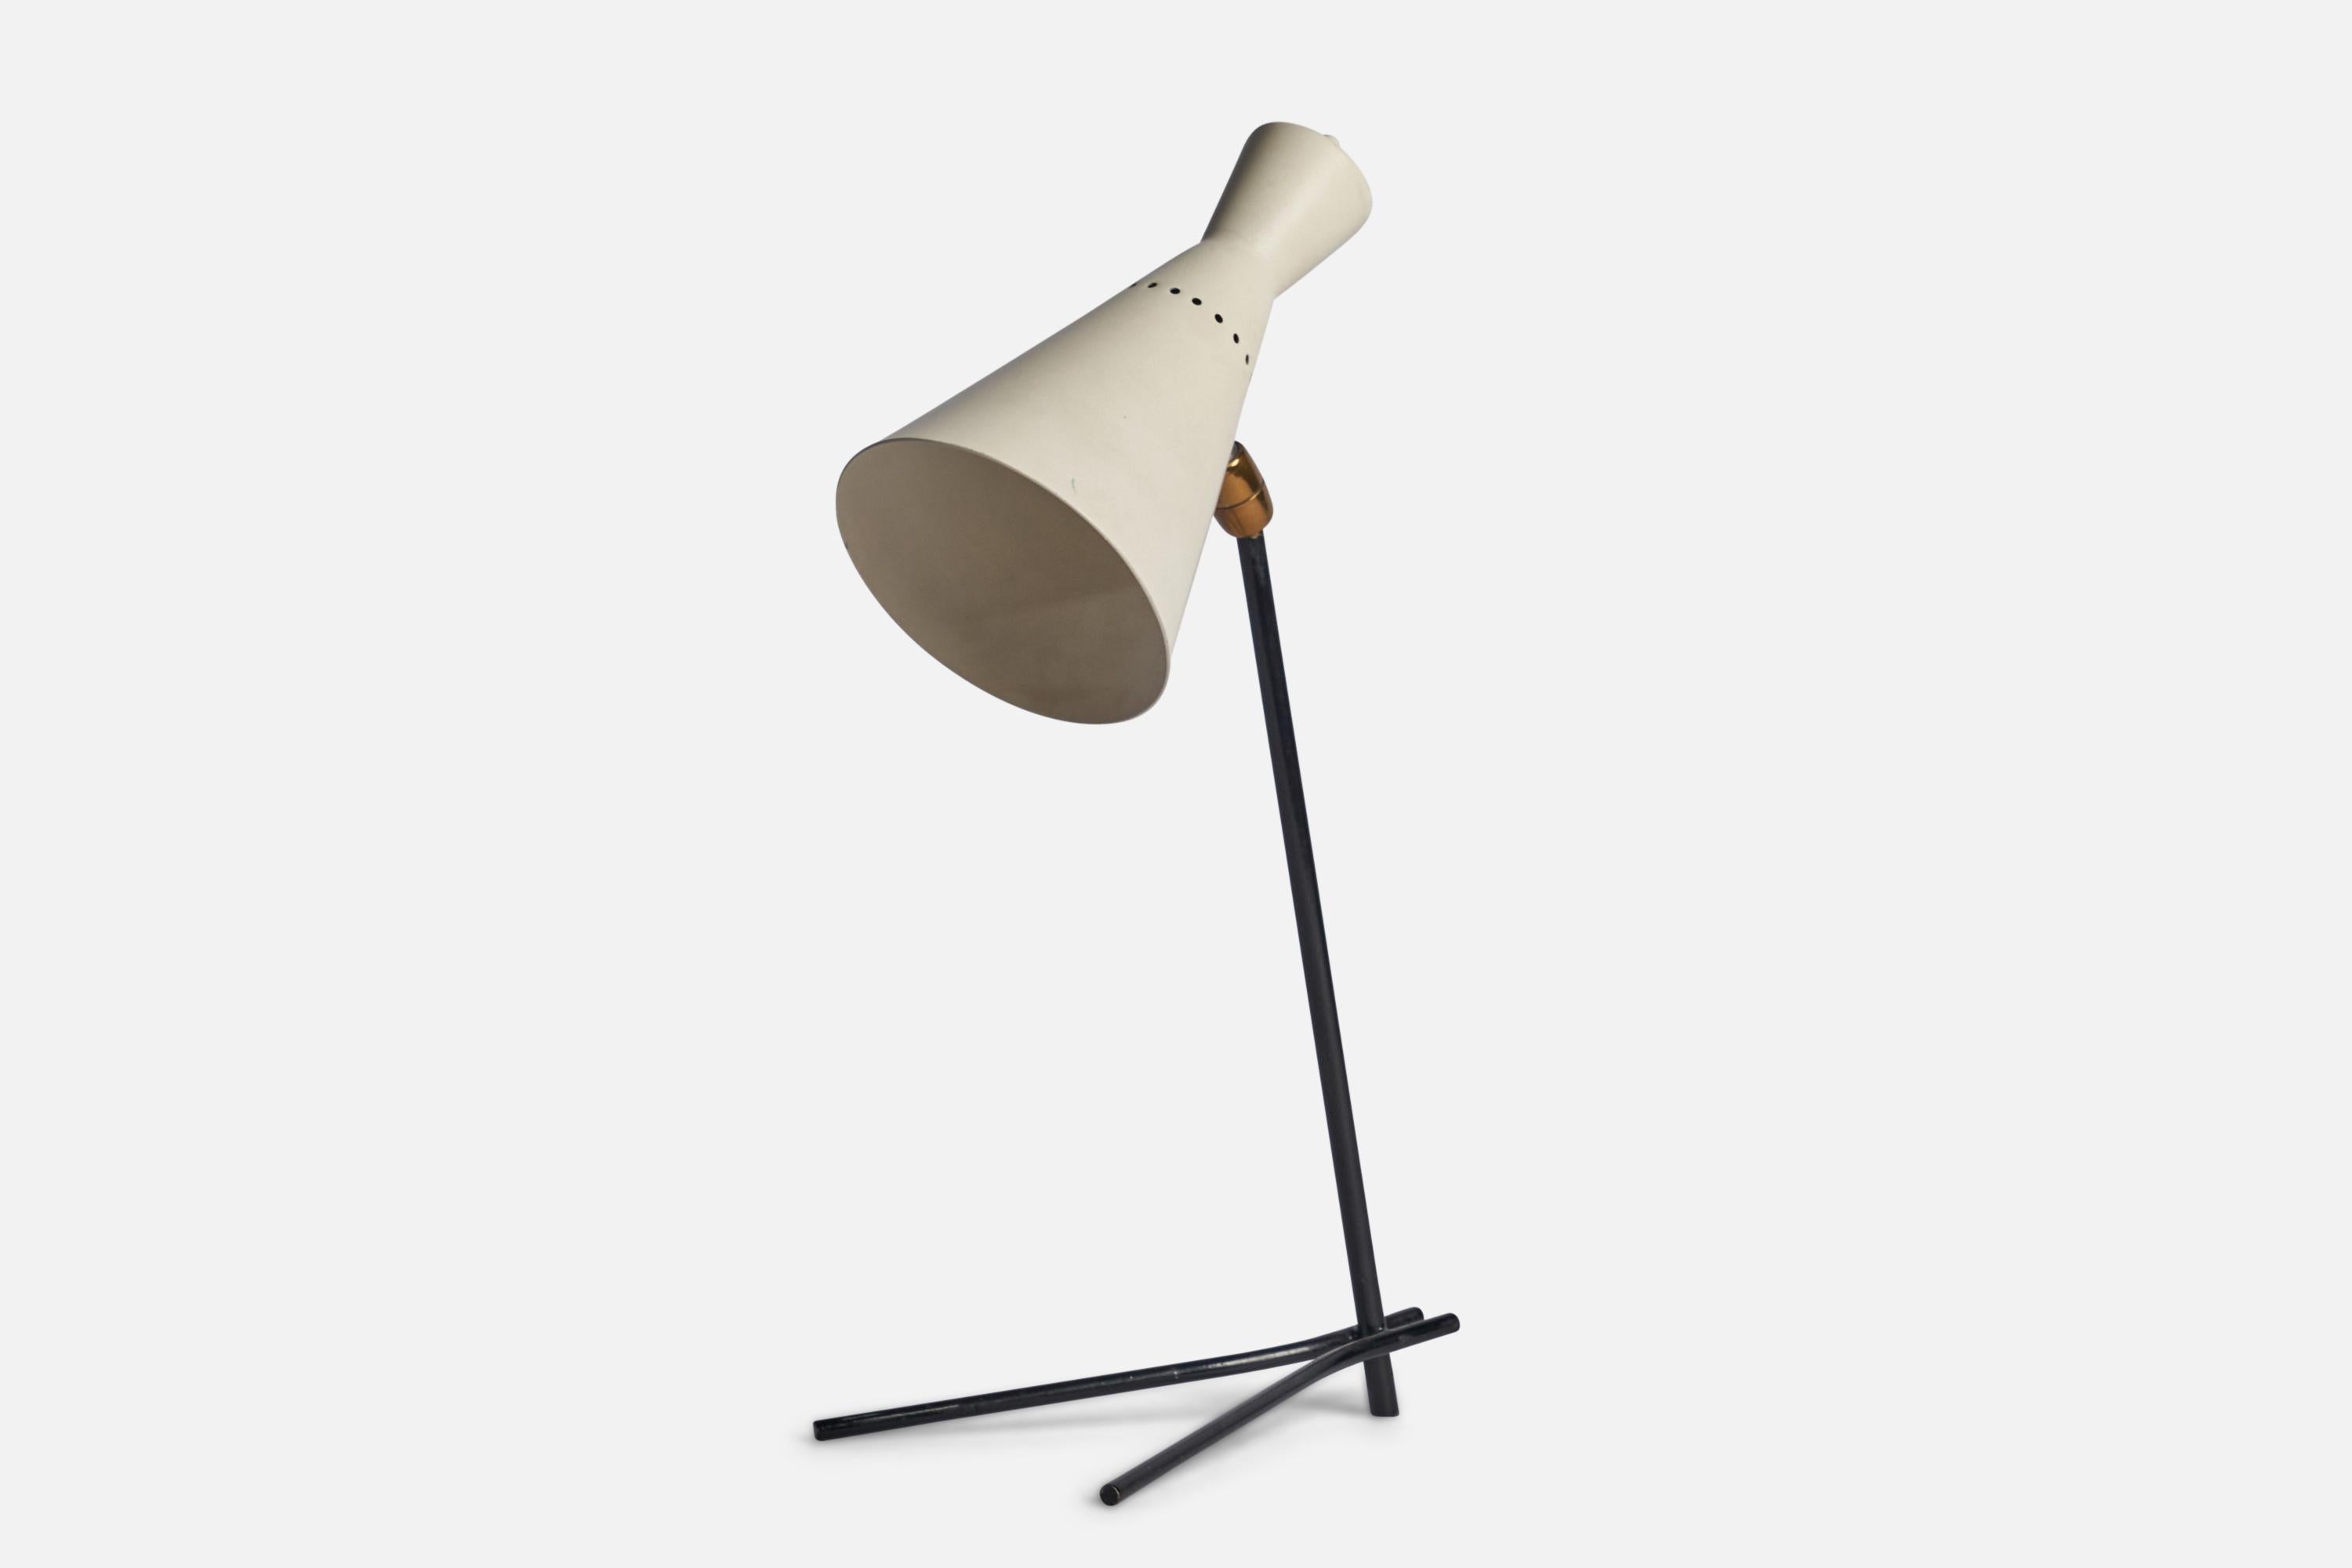 An adjustable black and white-lacquered metal and brass table lamp designed and produced by Gilardi & Barzaghi, Italy, 1950s.
Overall Dimensions (inches): 14” H x 5.15” W x 7” D
Dimensions variable based on position of light.
Bulb Specifications: